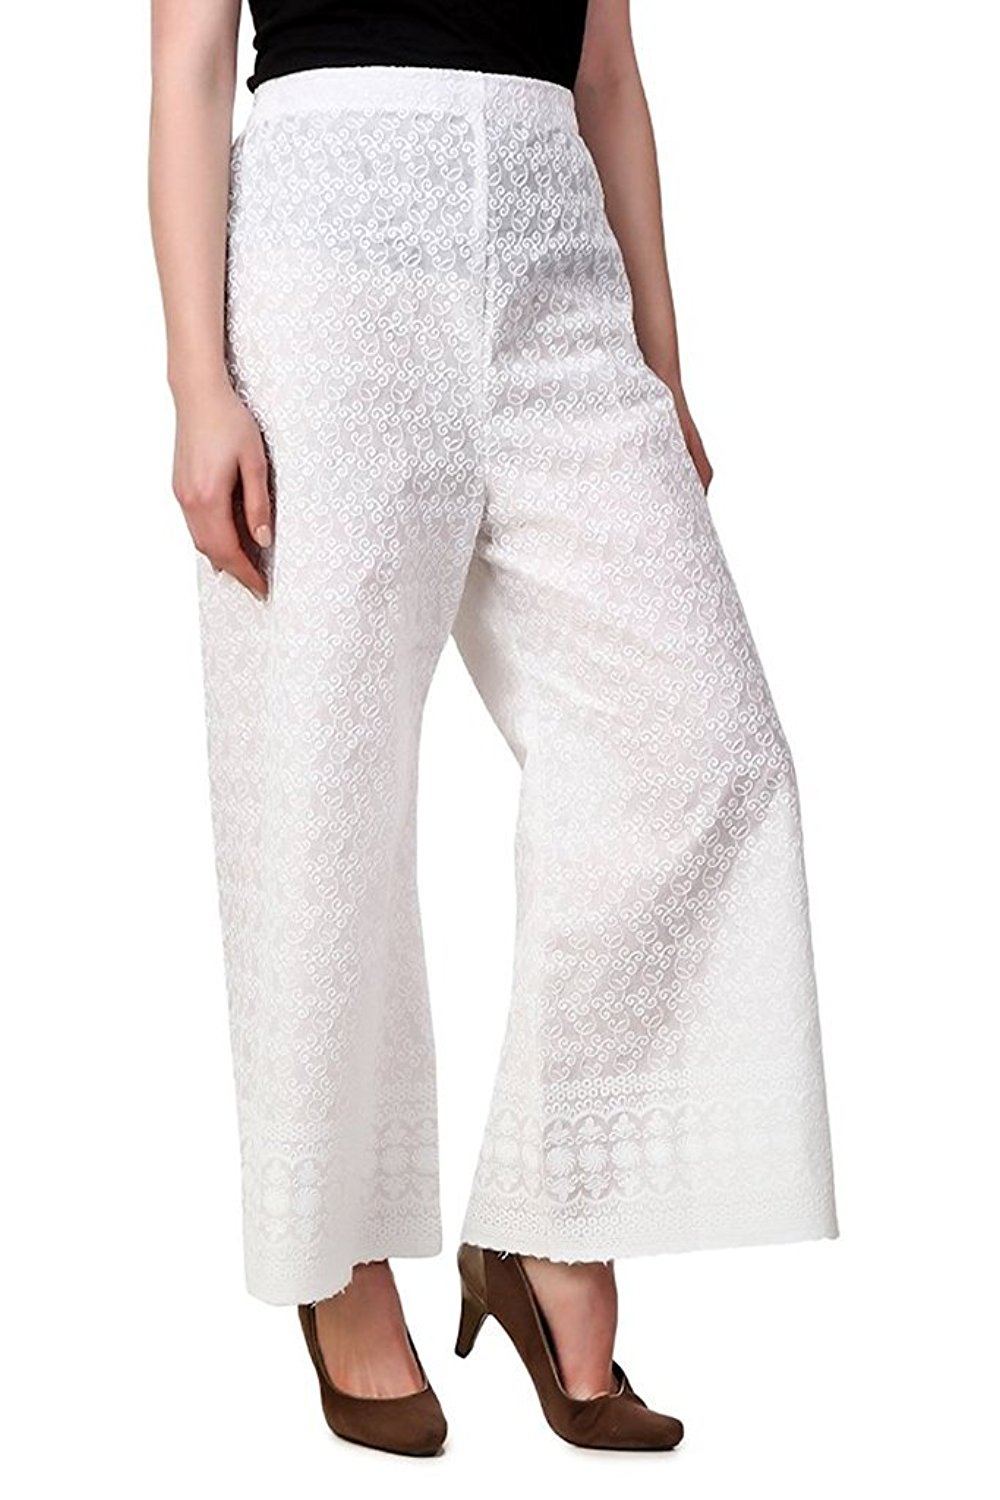 Buy Palazzo pant for women S - Cotton Palazzo - chicken embroidery ...